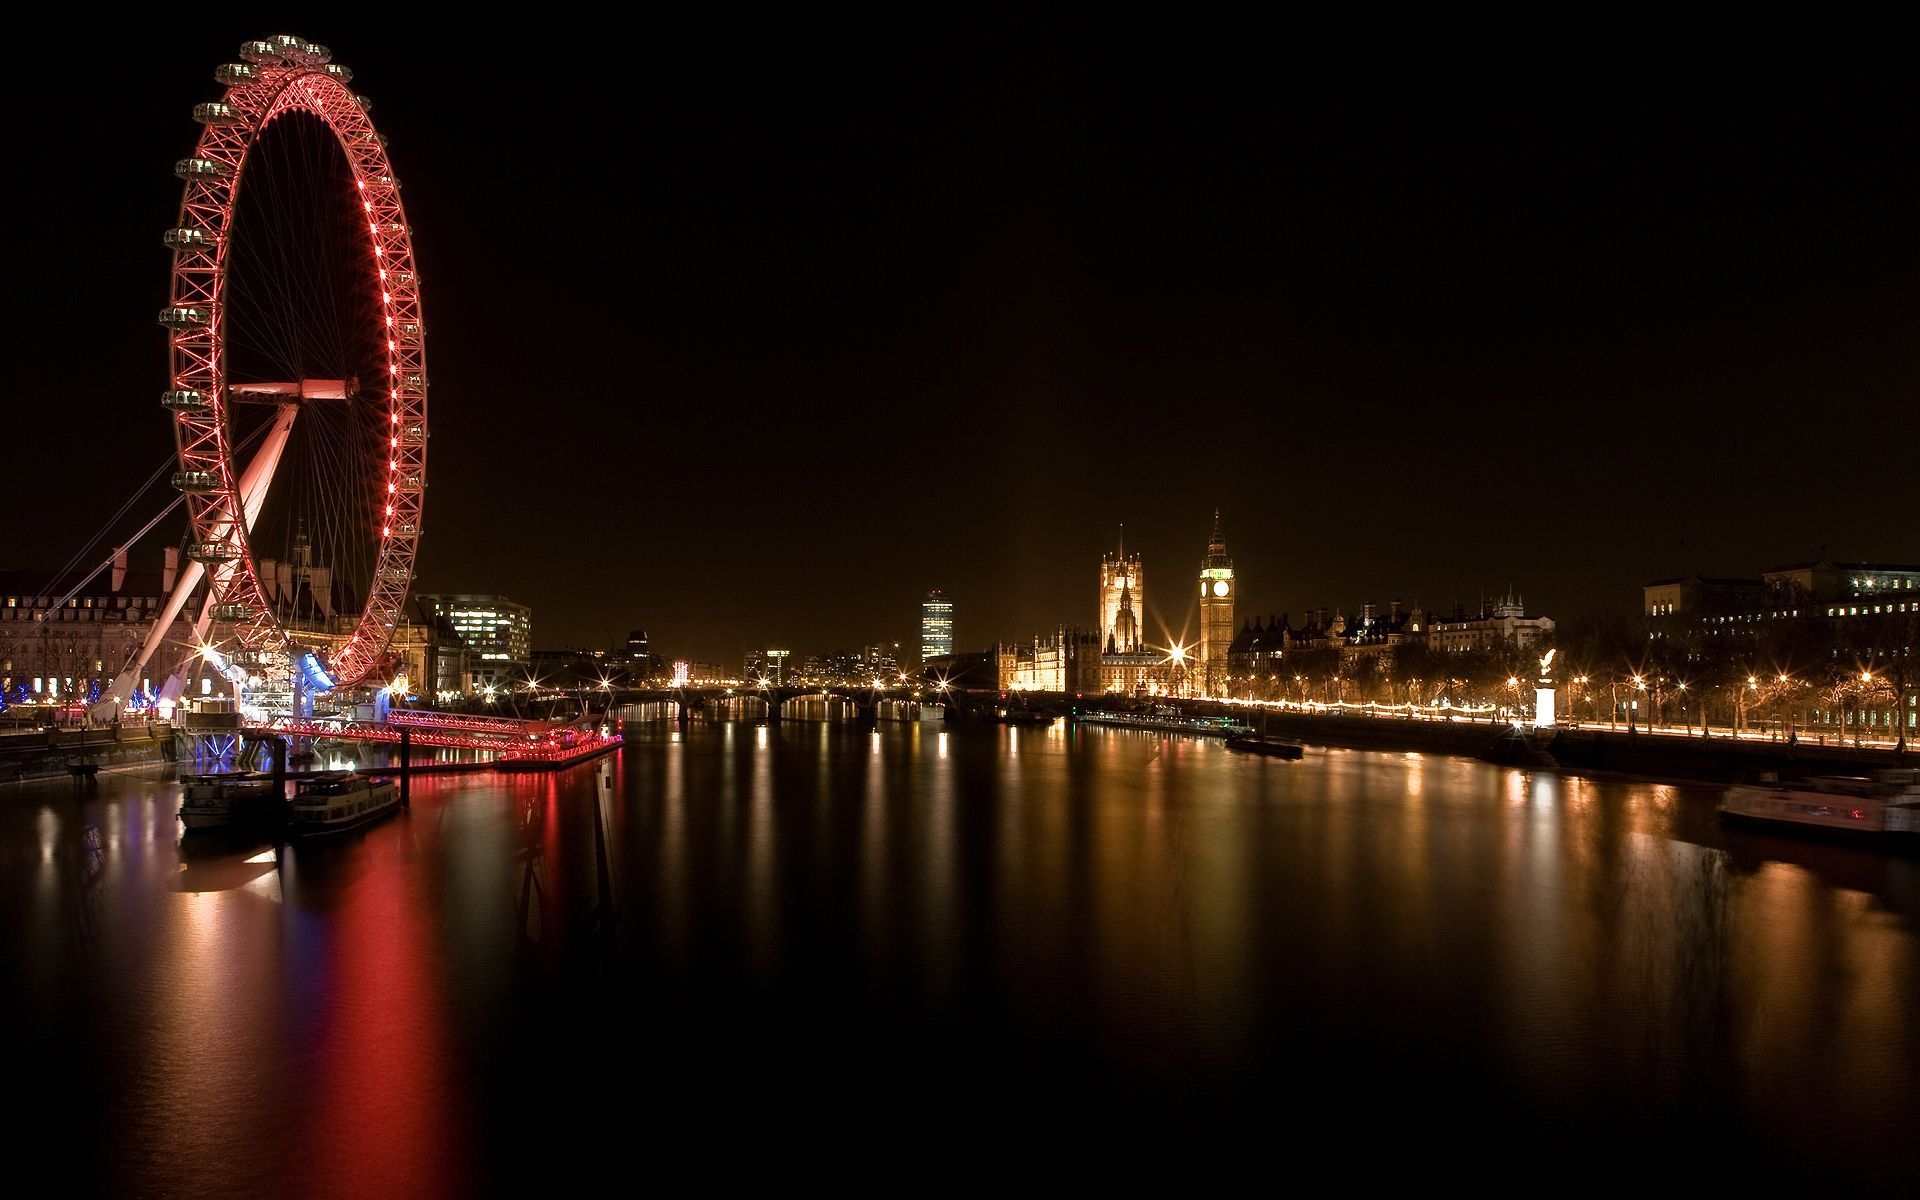 Wallpapers Tagged With LONDON | LONDON HD Wallpapers | Page 1